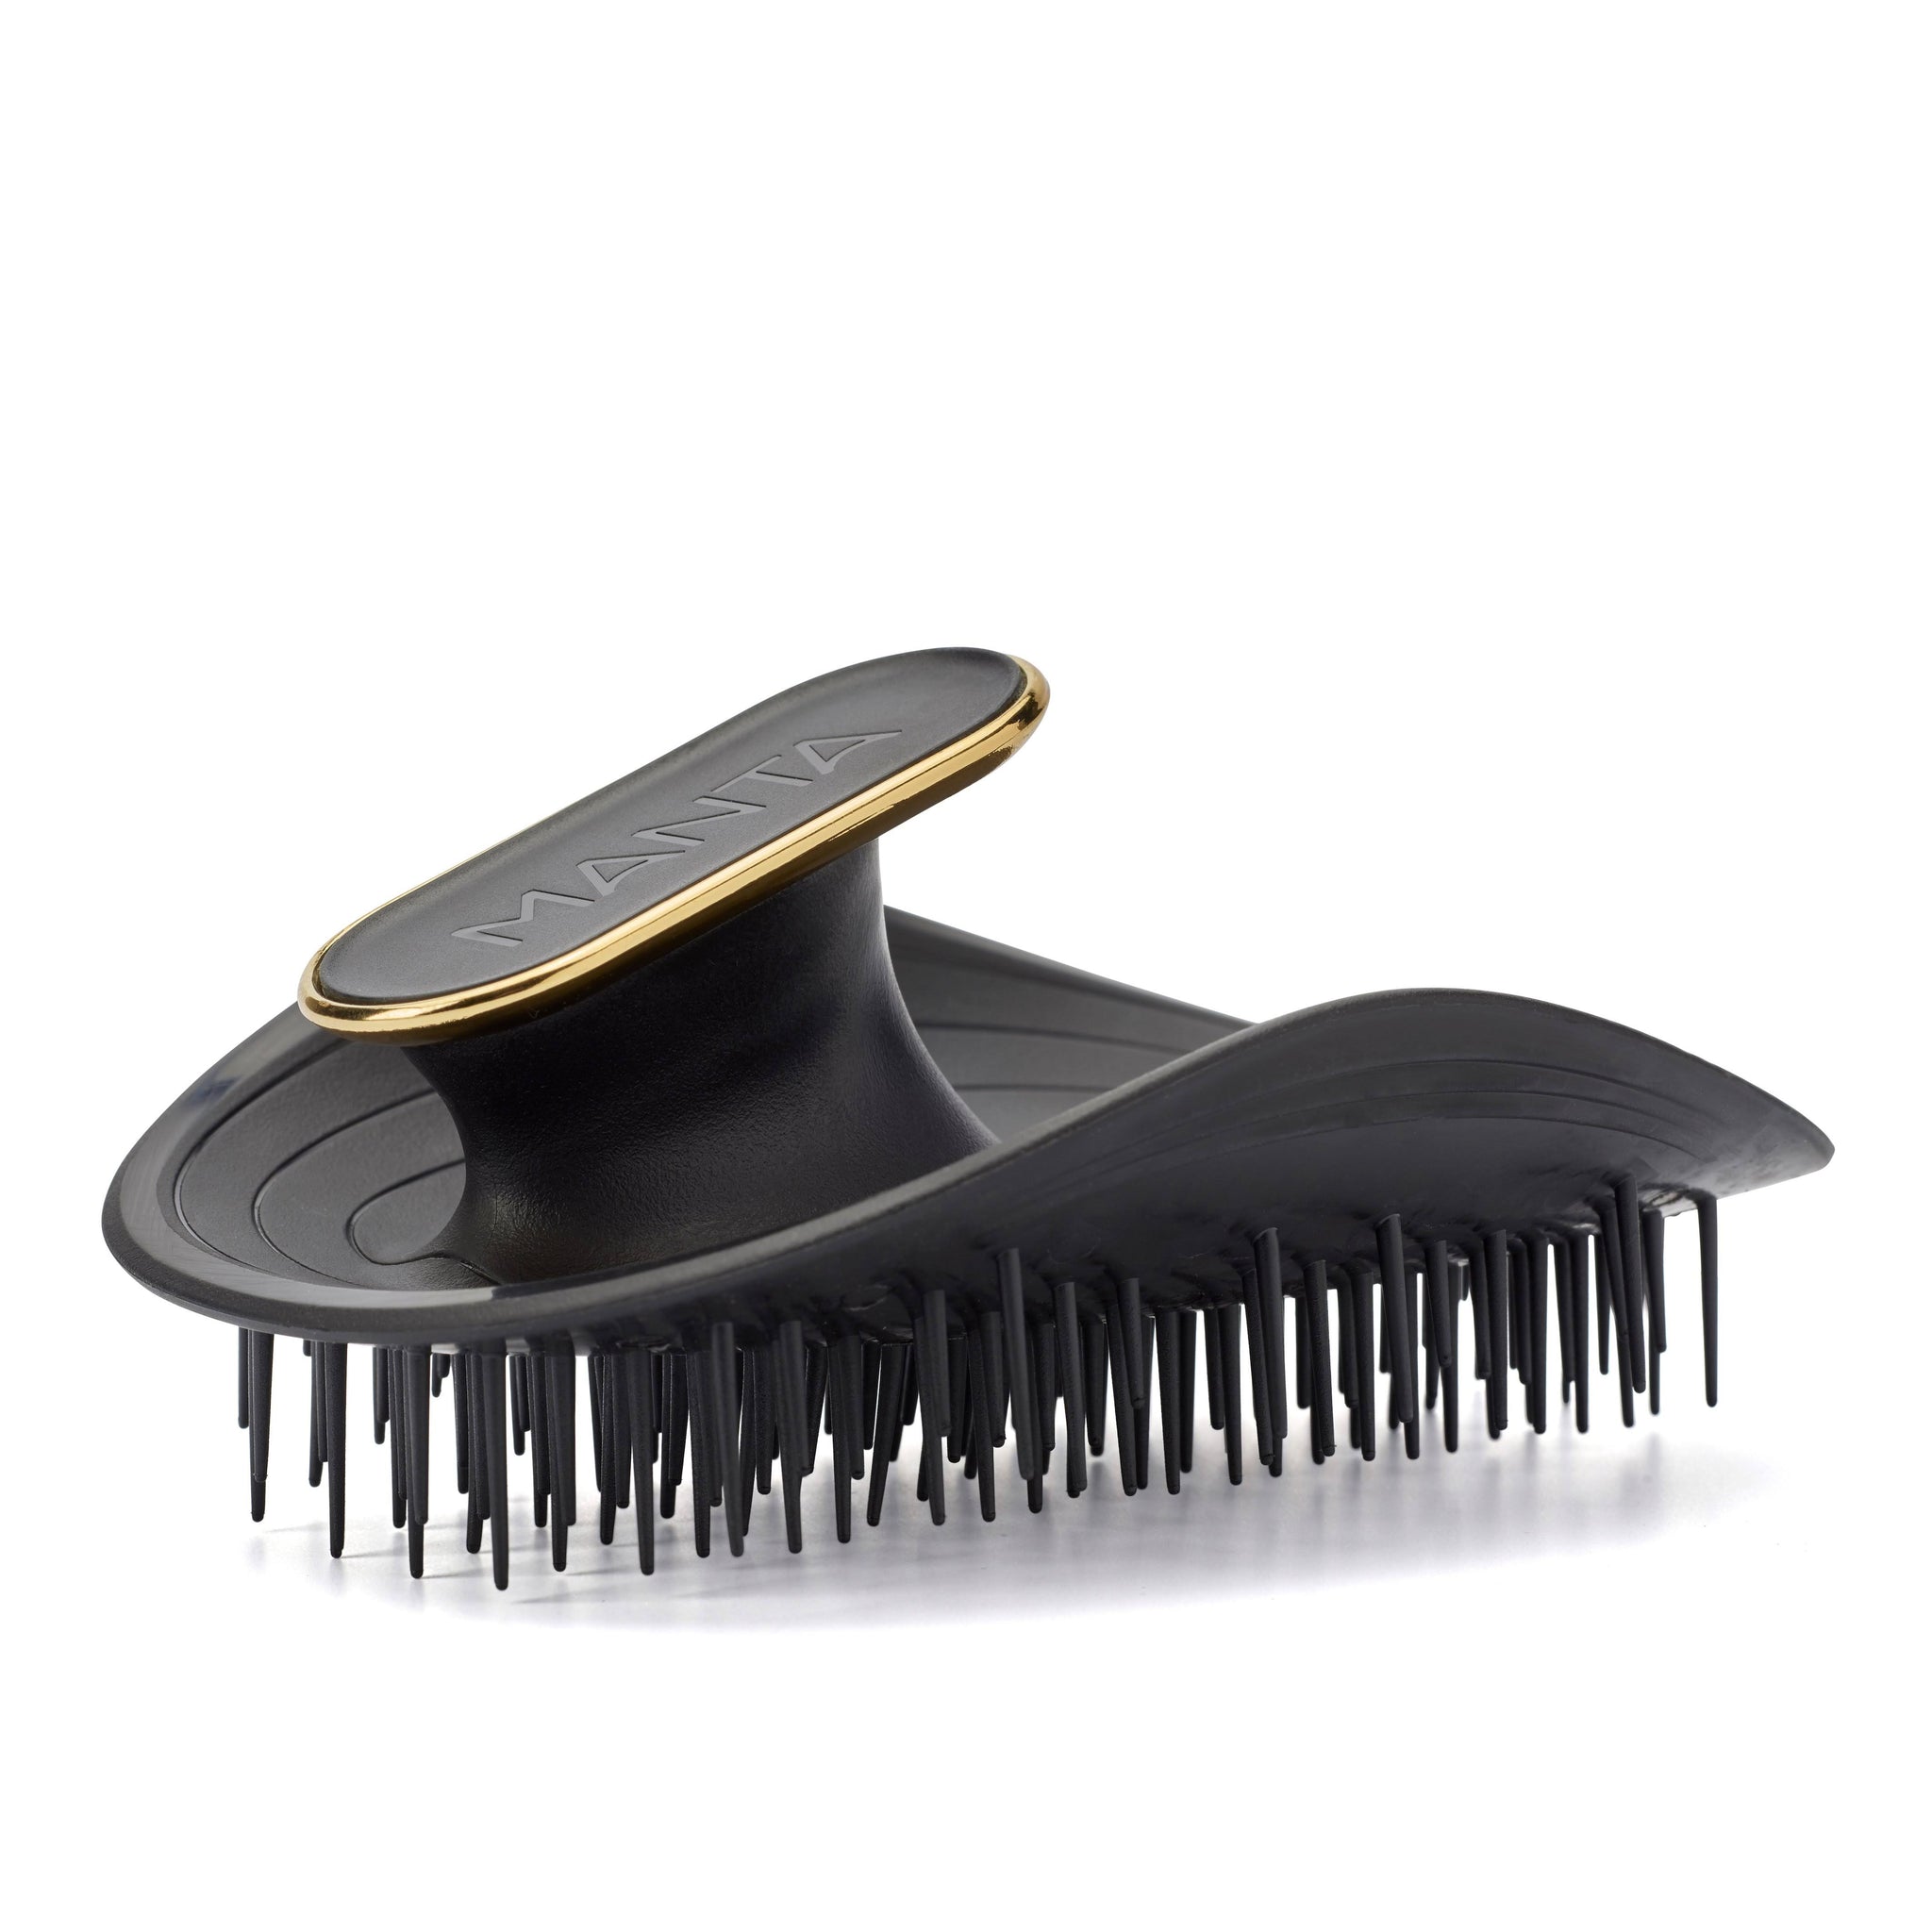 UNIKONCEPT Lifestyle Boutique and Lounge;  Manta Hair Brush in Black